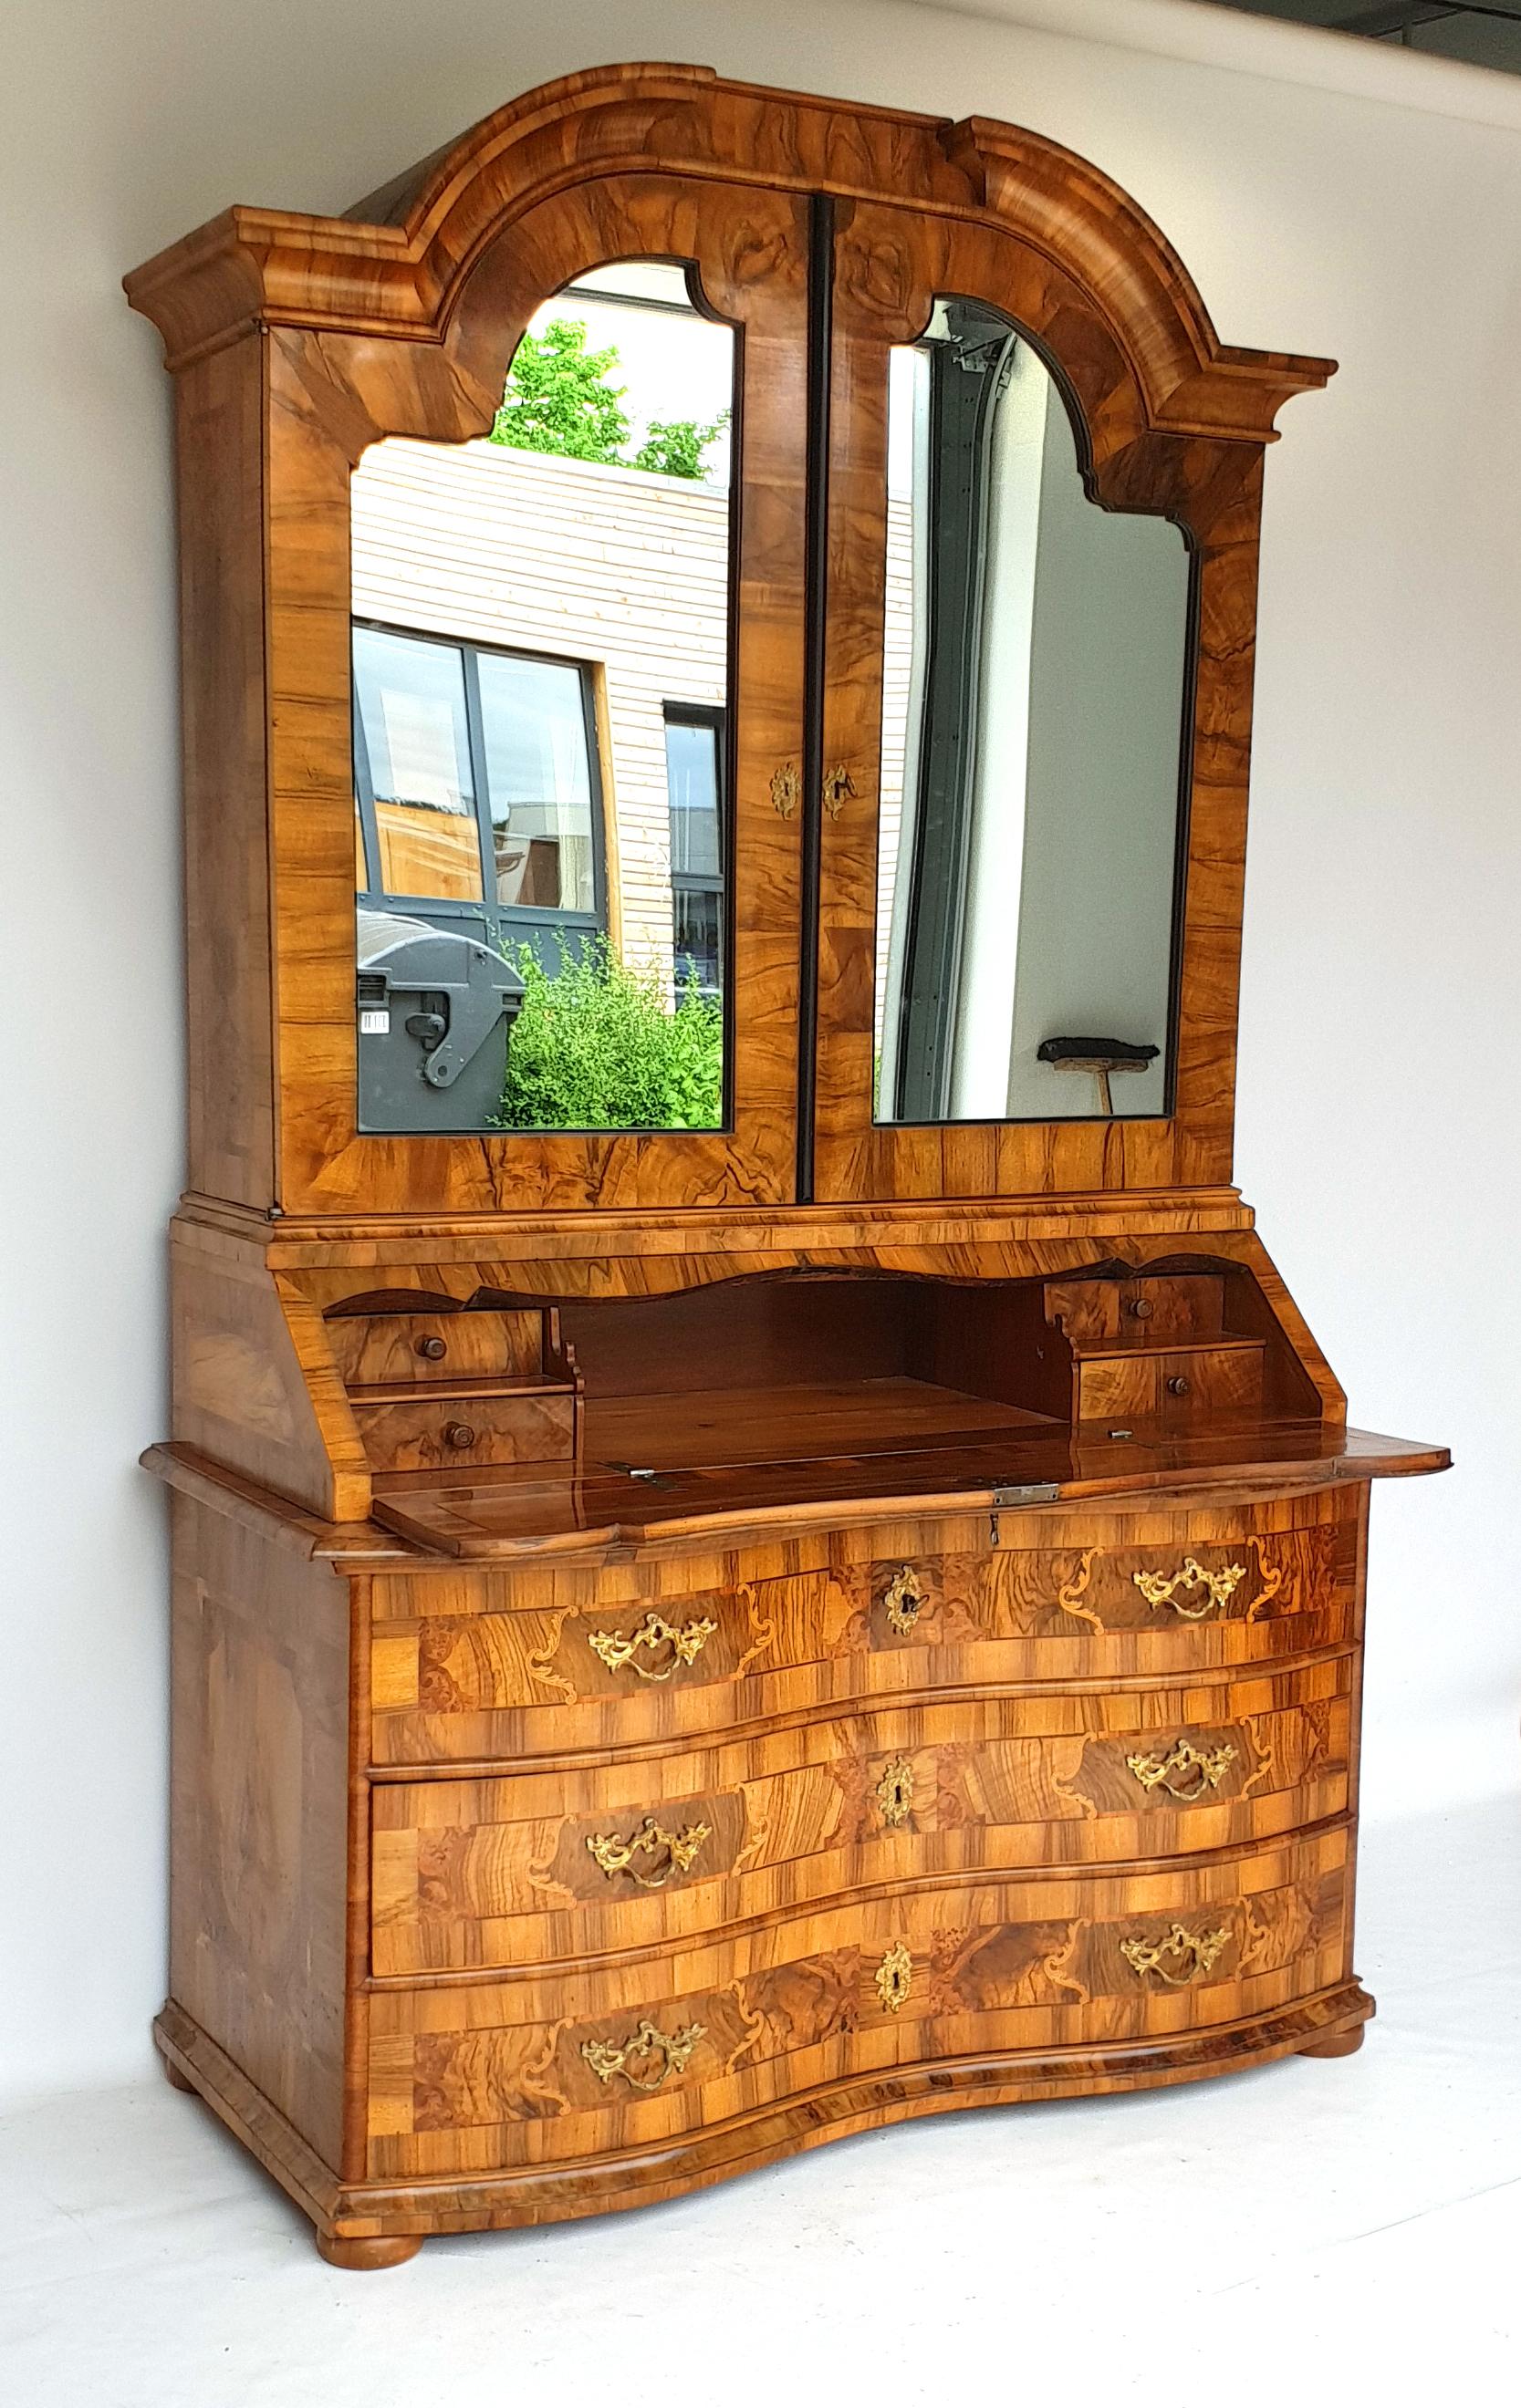 Baroque Secretary, Dresden, Germany, circa 1745. Of courtly provenance. 

Made of walnut and plum wood. Marquetry in rosewood/palisander and bird's-eye maple, partially ebonized. Inlays in pewter. 

Lower part of chests of drawers resting on